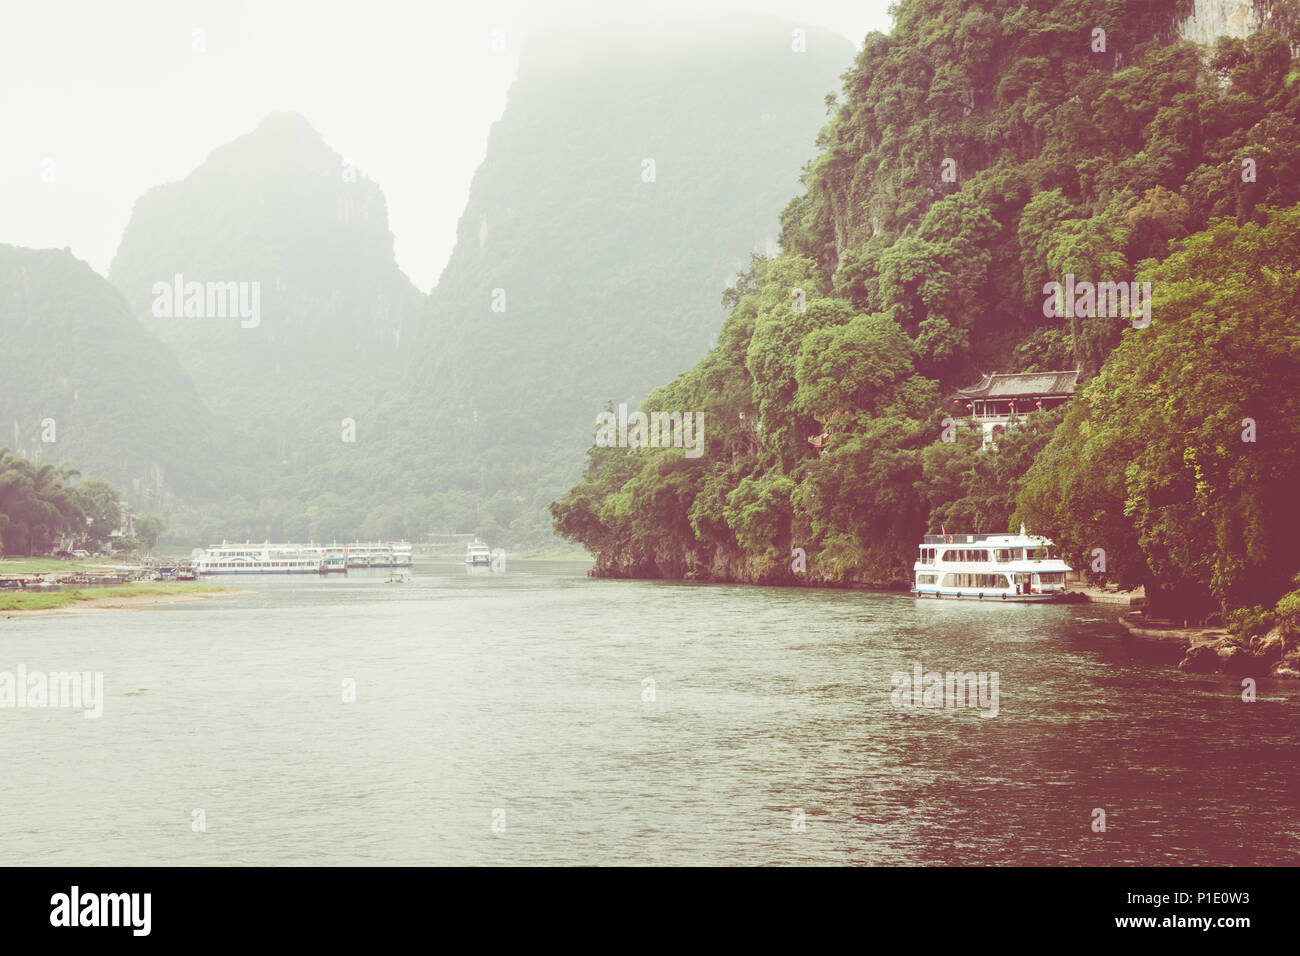 Scenic landscape at Yangshuo County of Guilin, China. View of beautiful karst mountains and the Li River (Lijiang River) with azure water. Amazing gre Stock Photo